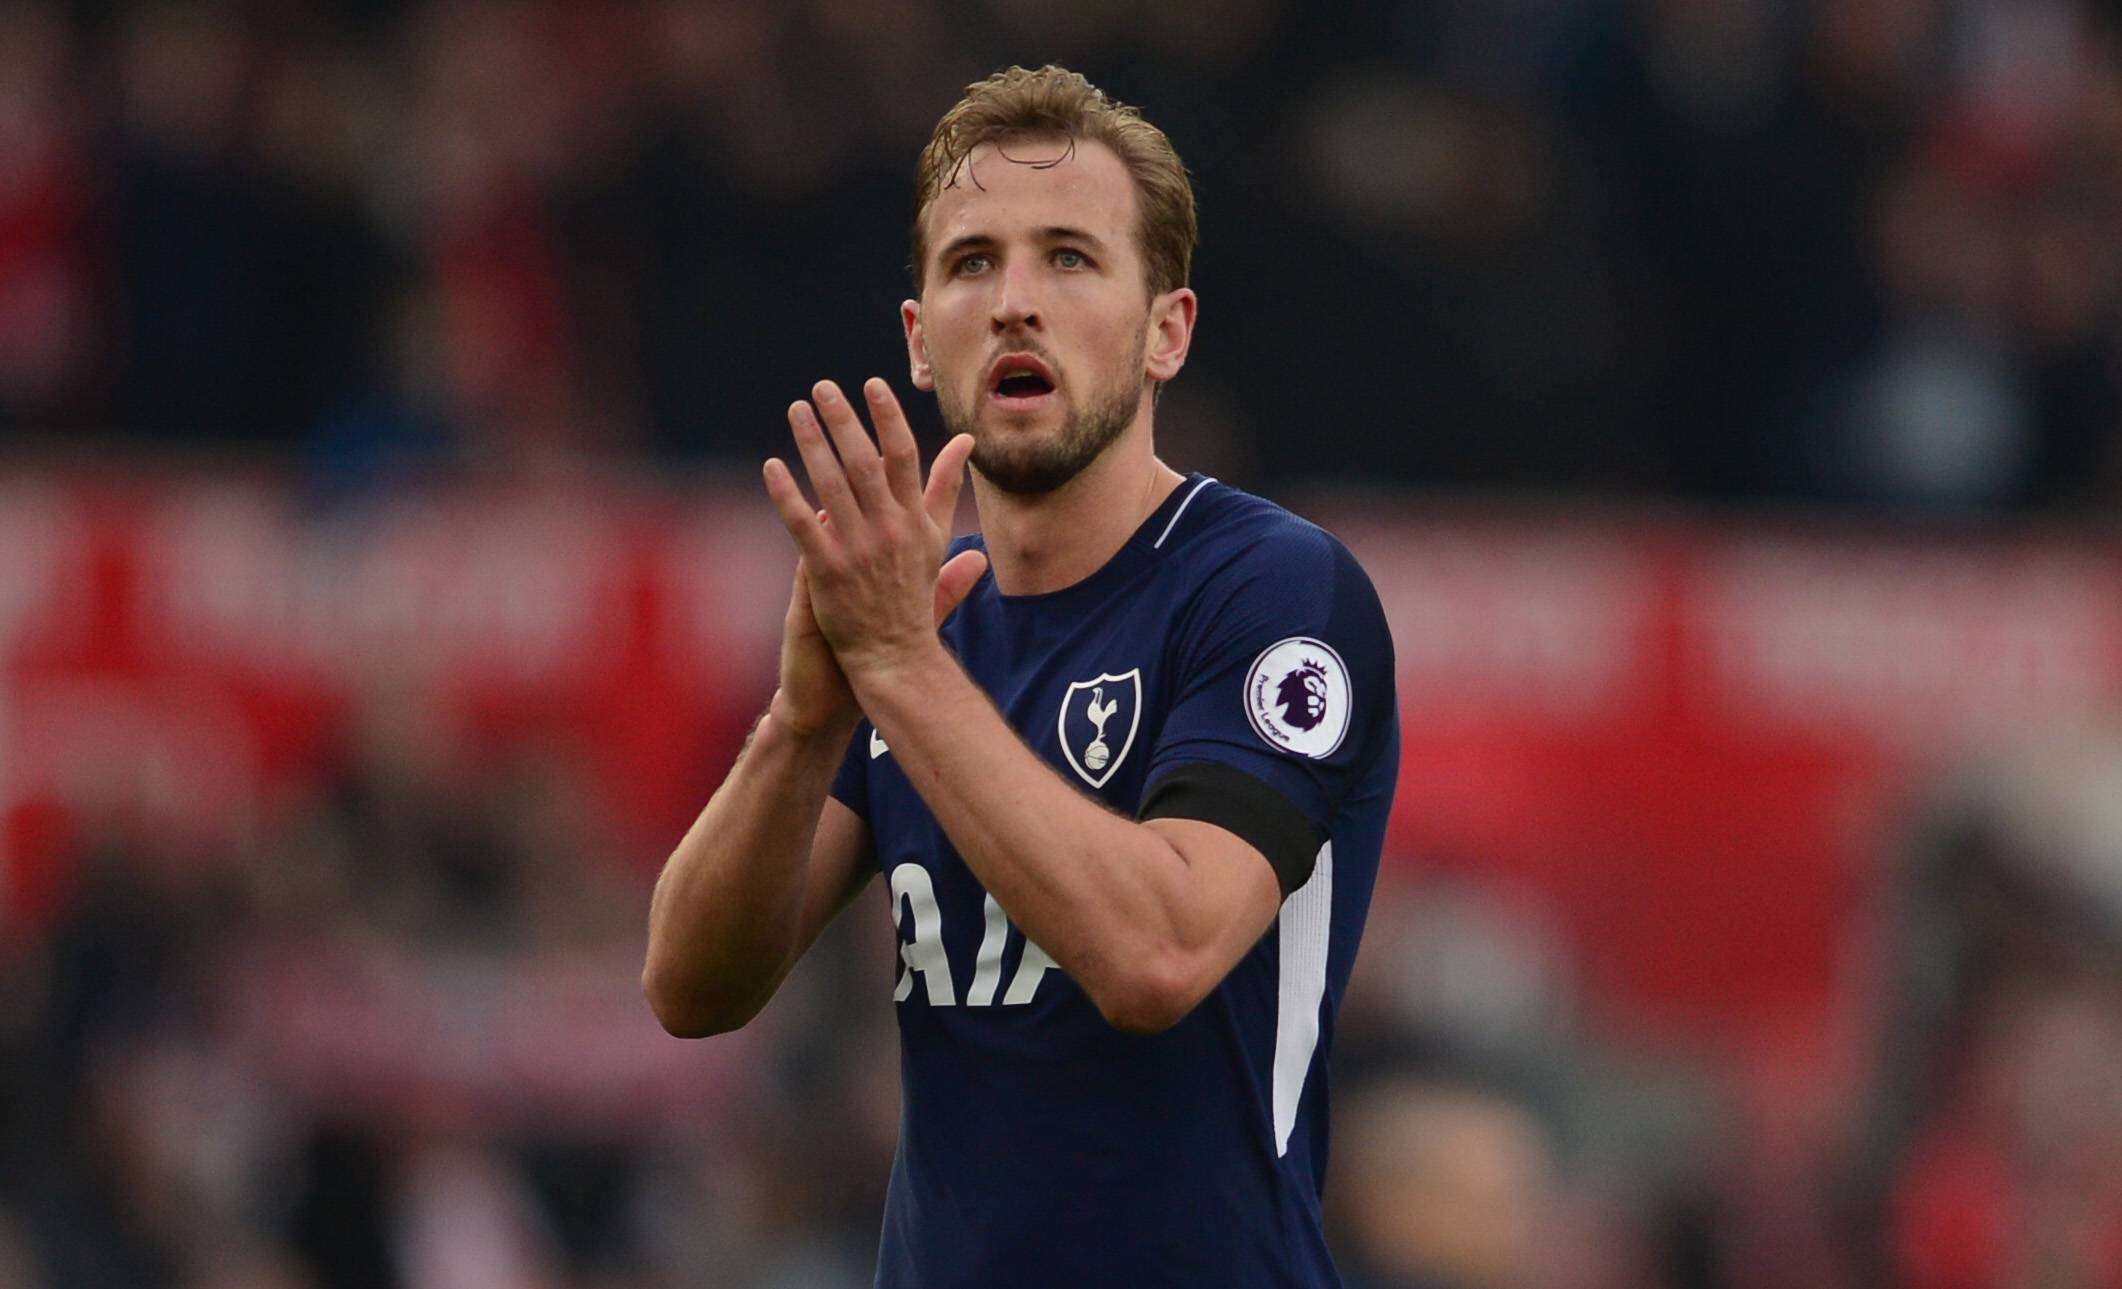 Tottenham Hotspur star and Chelsea target Harry Kane is building a new home near Cobham.